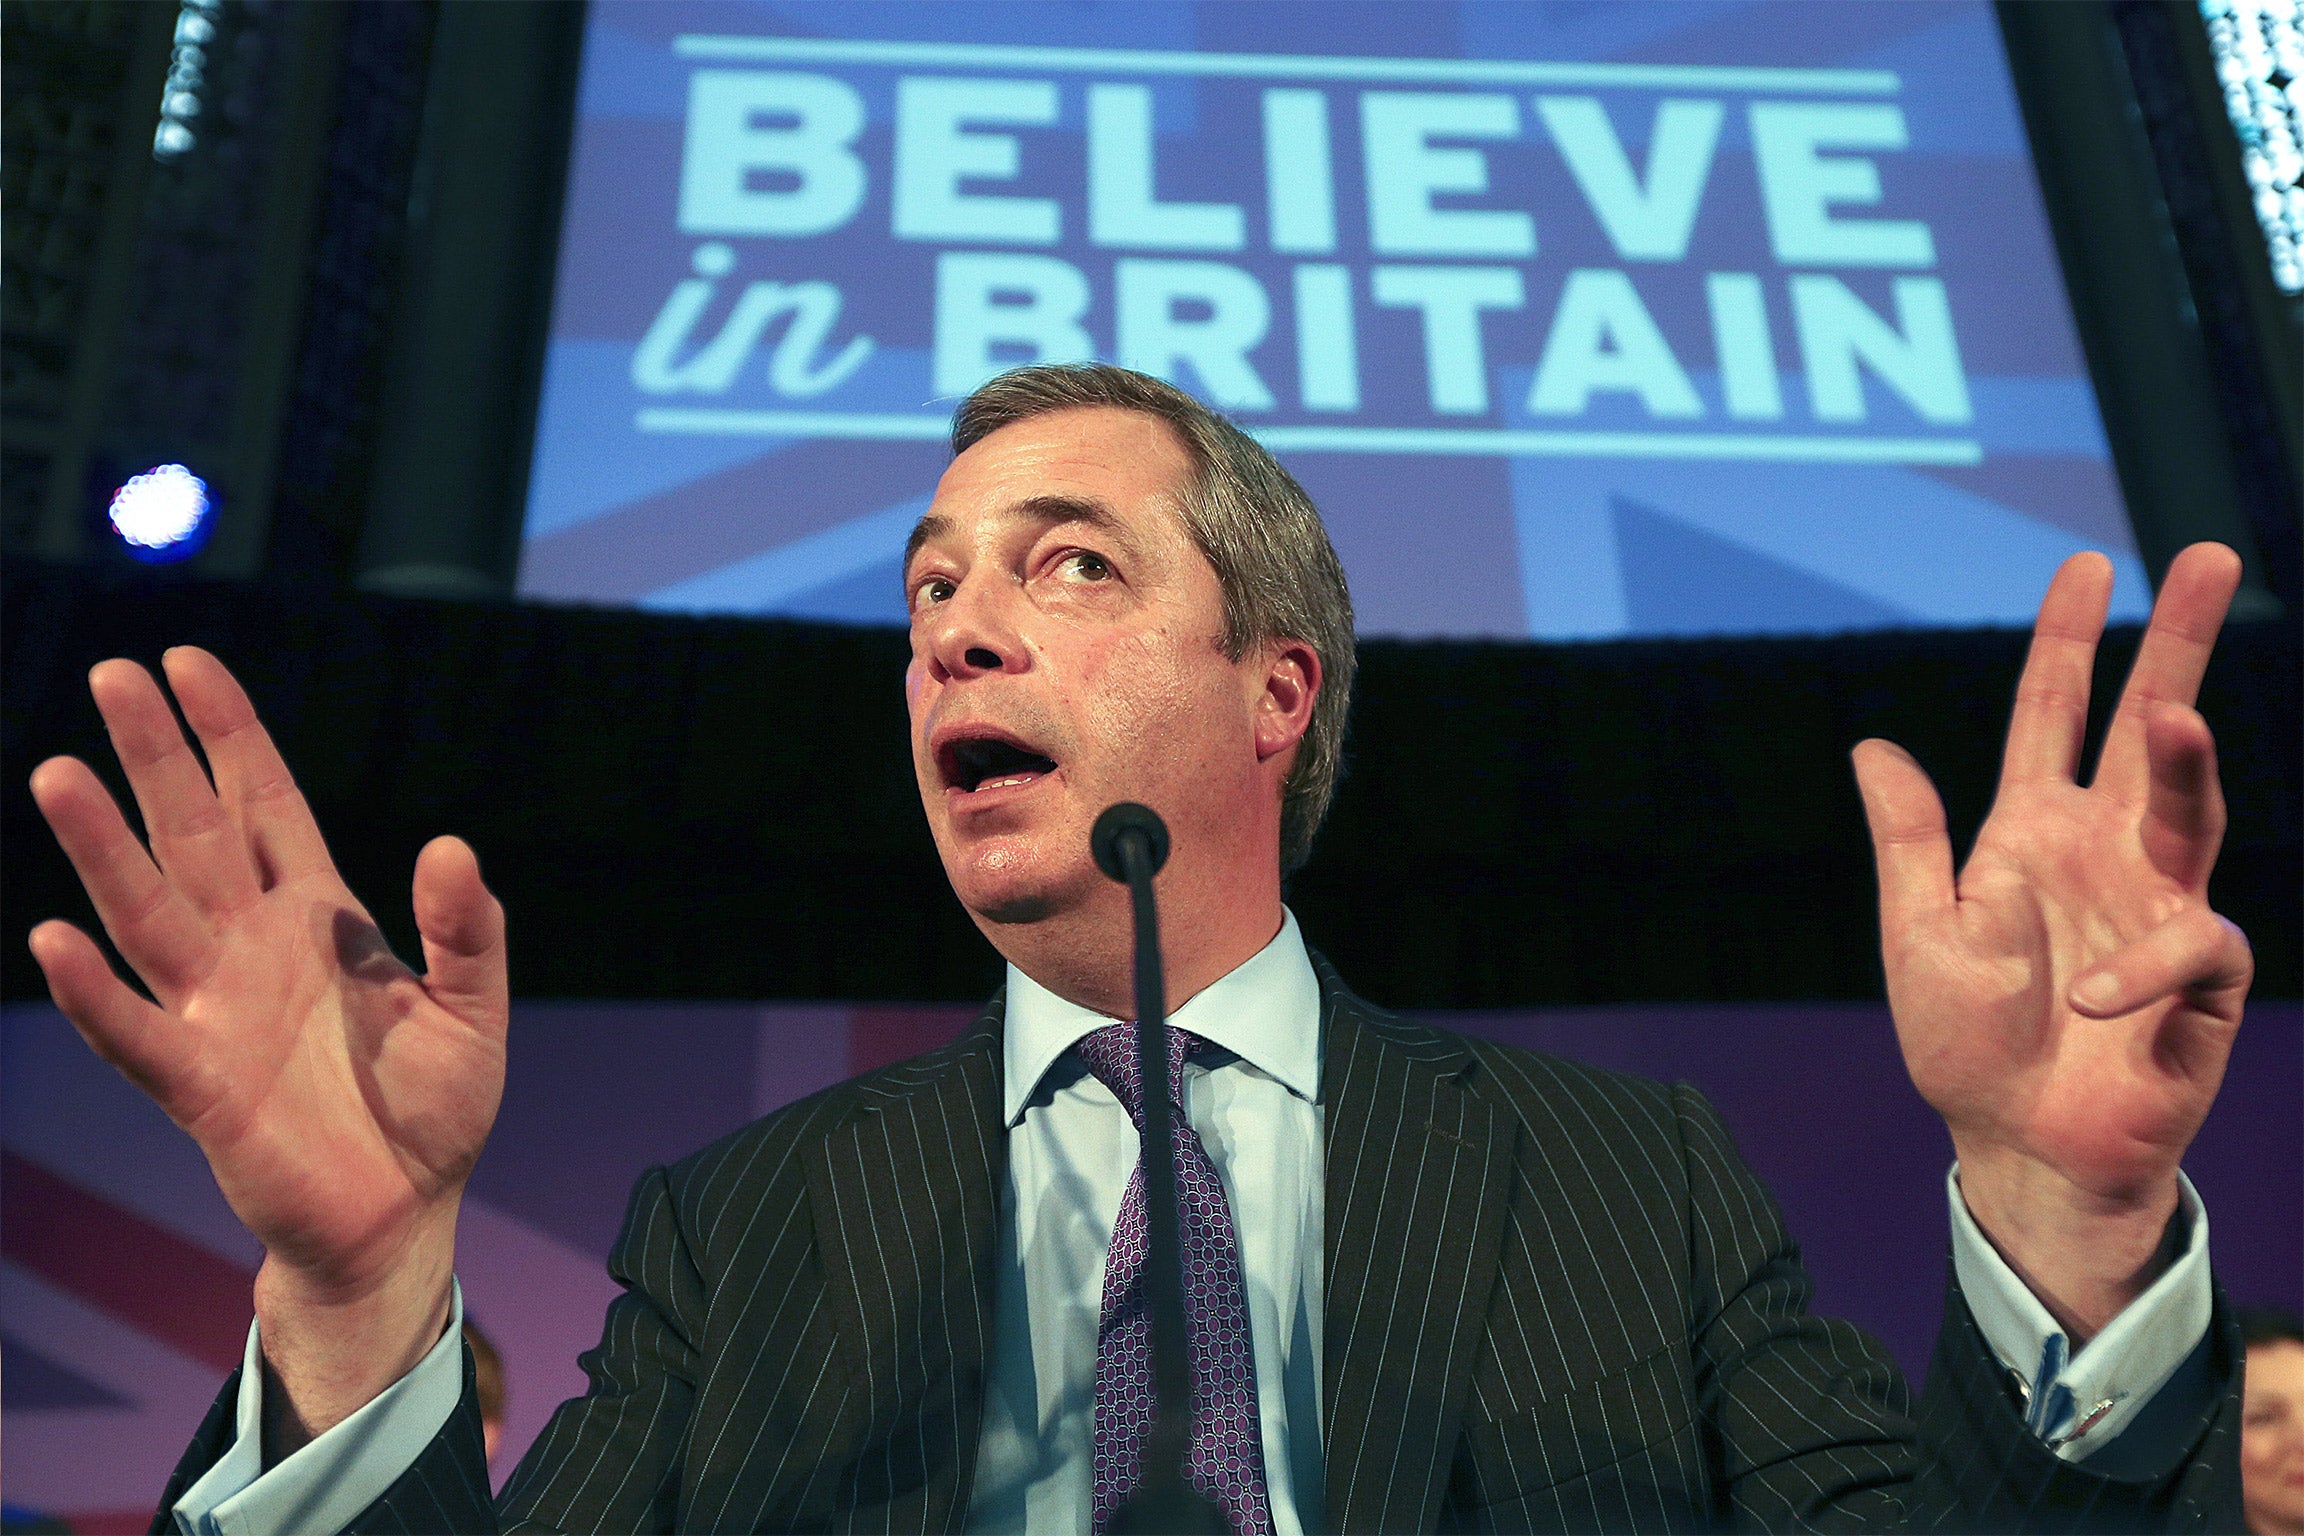 Ukip leader Nigel Farage: 'There is no U-turn, there is a change of emphasis'